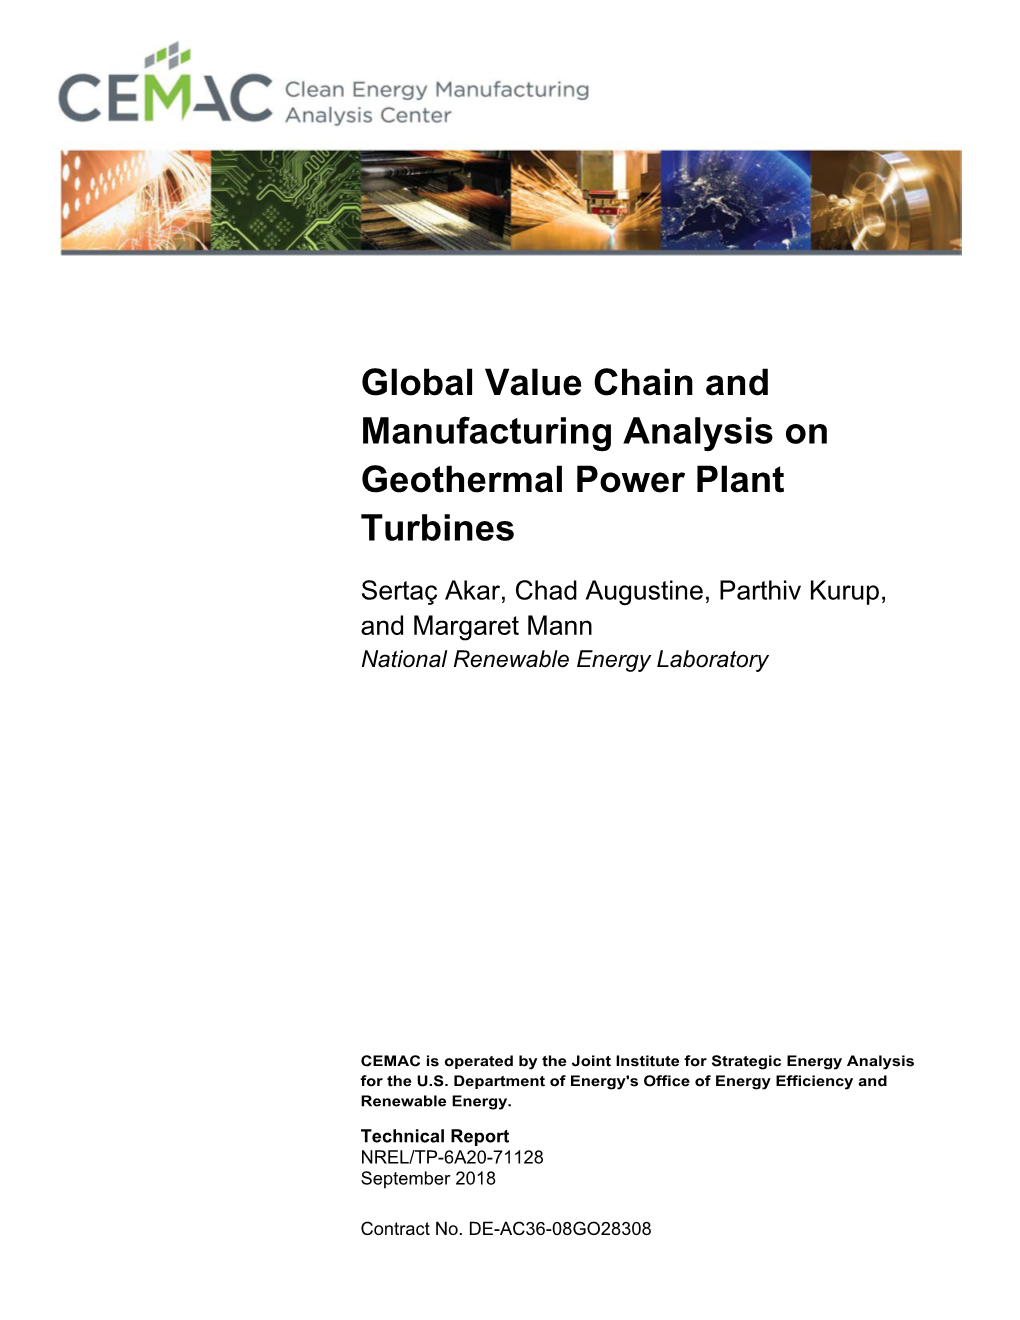 Global Value Chain and Manufacturing Analysis on Geothermal Power Plant Turbines